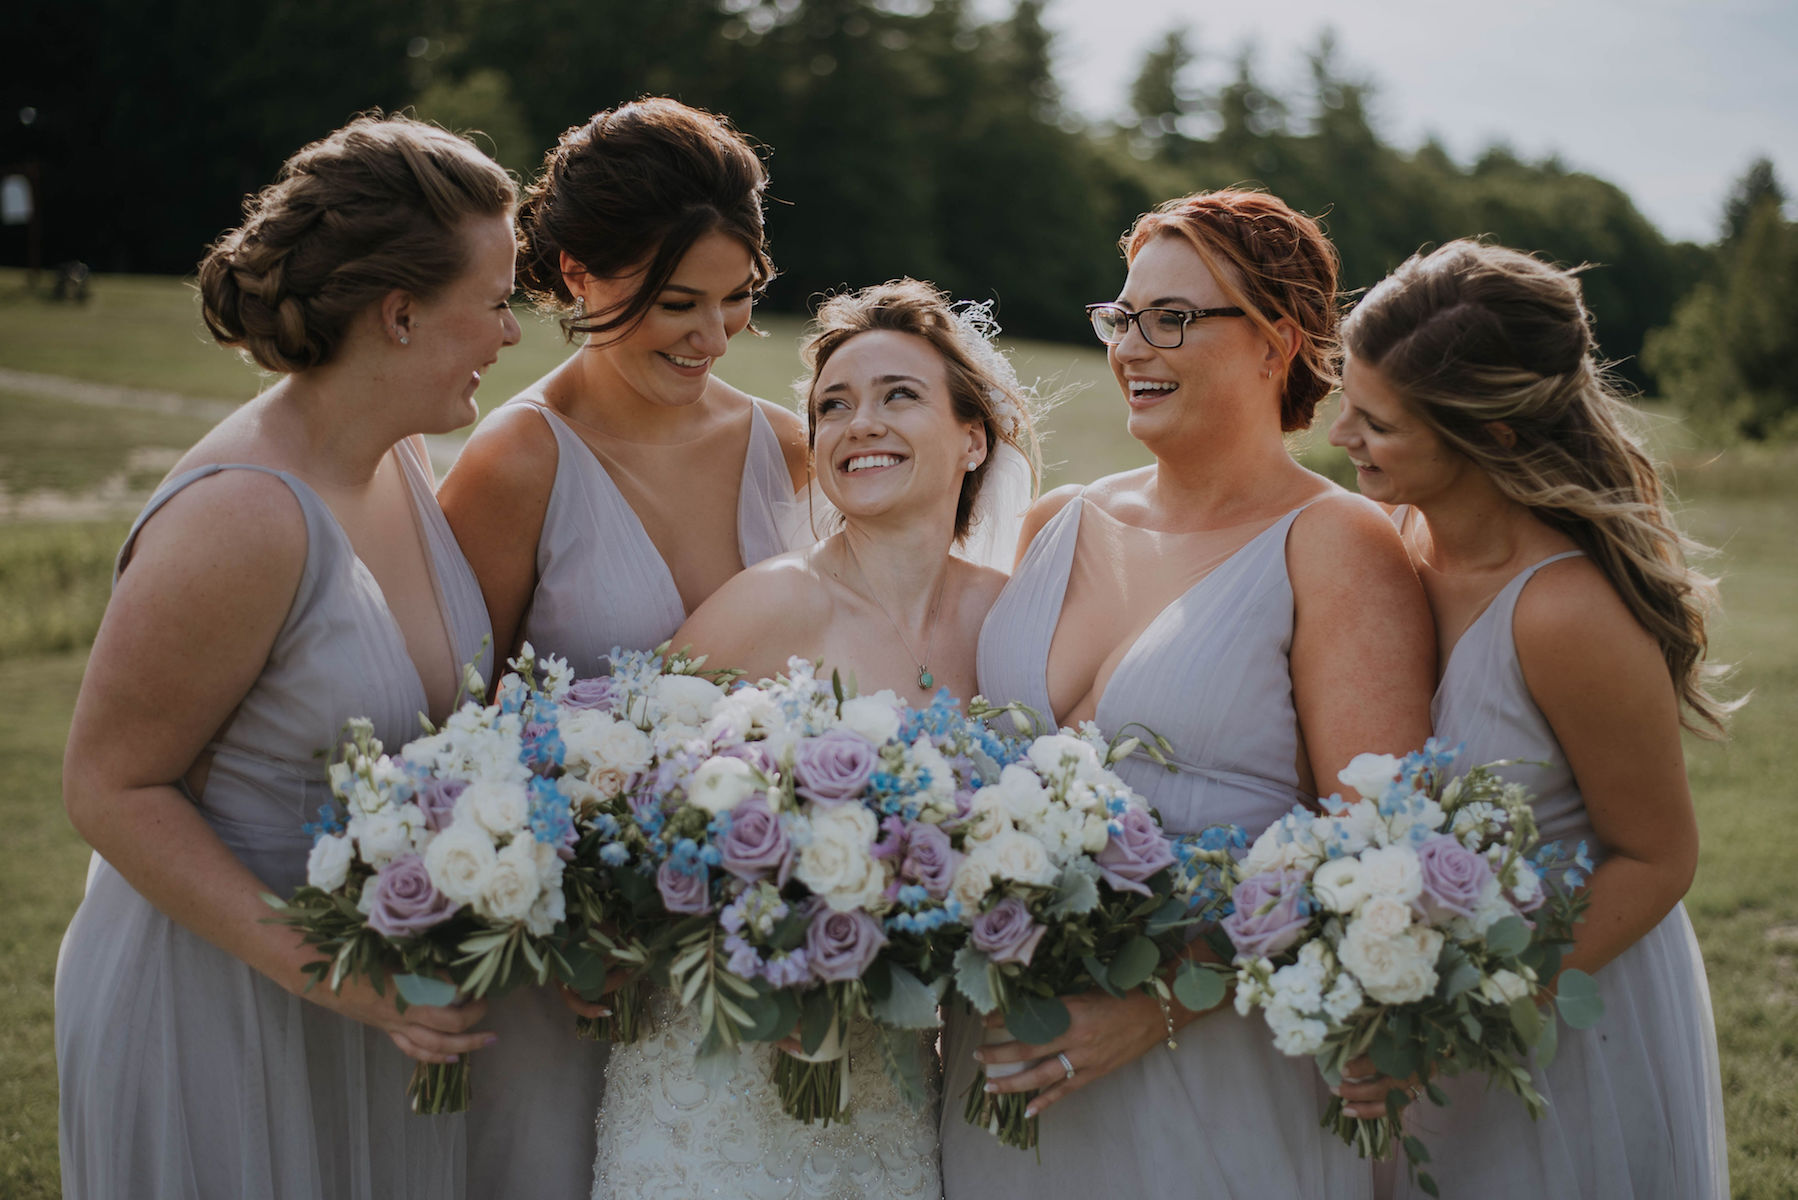 Dreamy Bridesmaid Dresses Accent New Hampshire Country Club Wedding Image